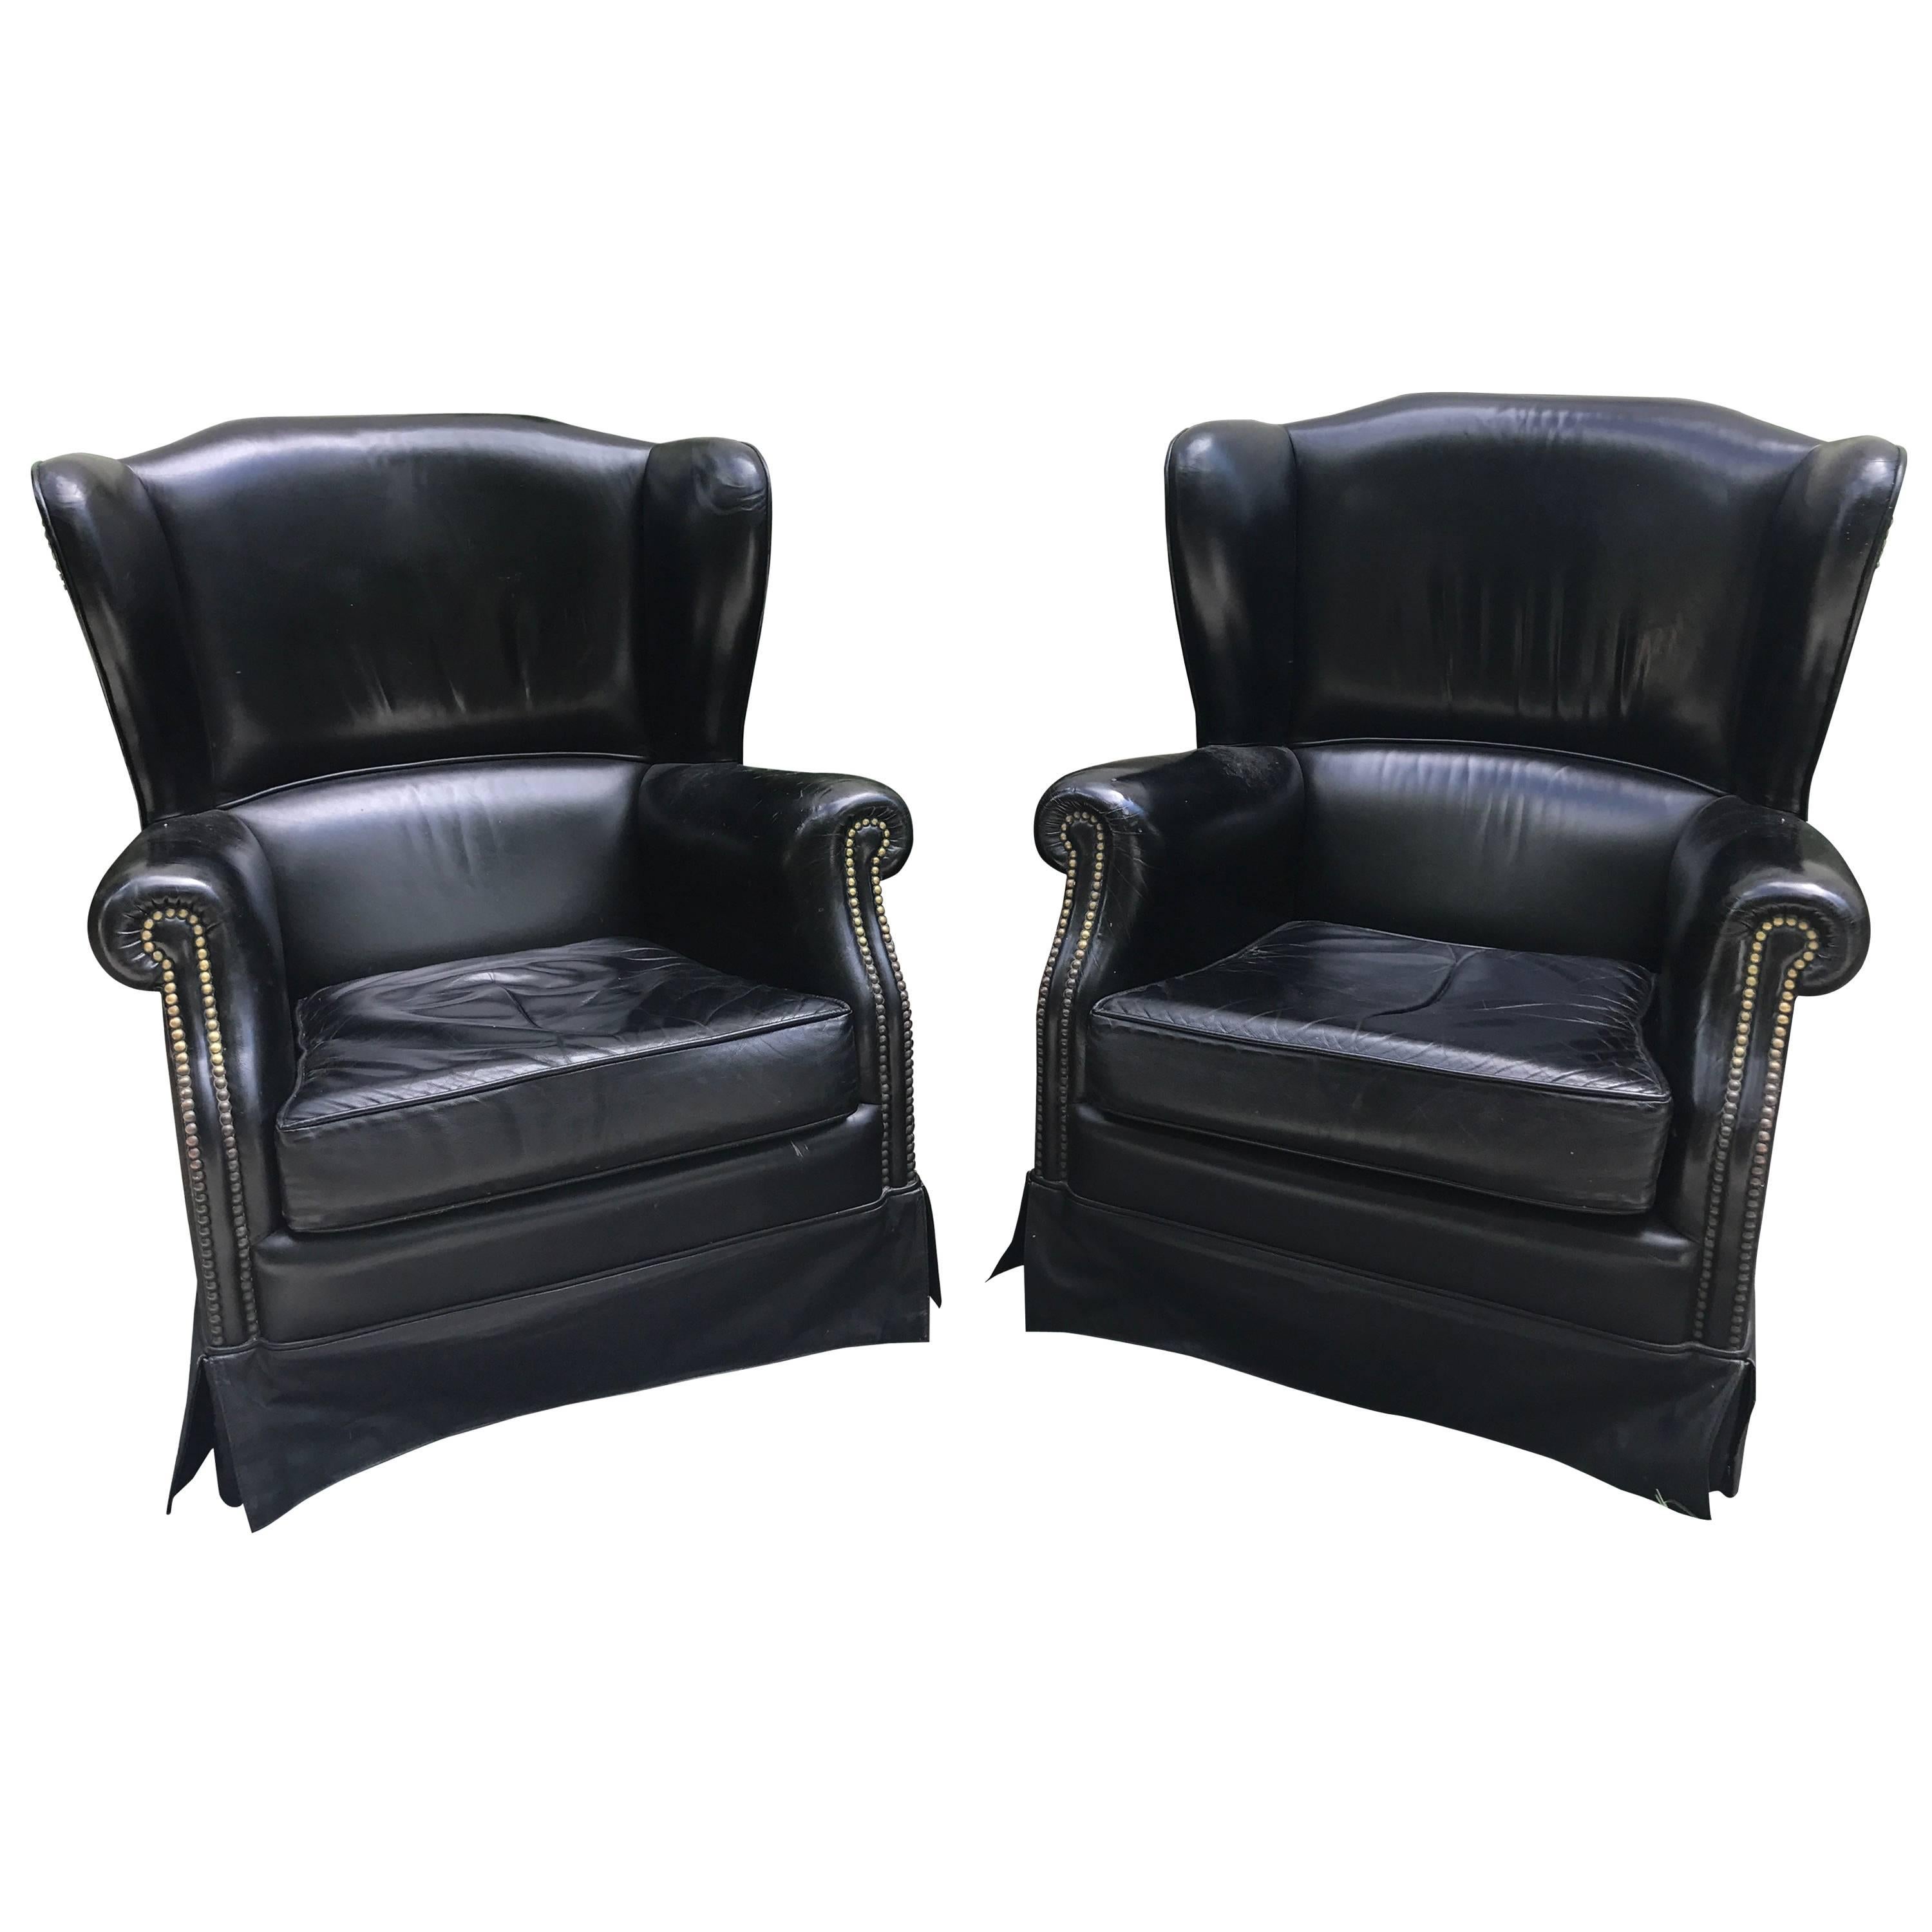  Black French Leather Wing Chairs